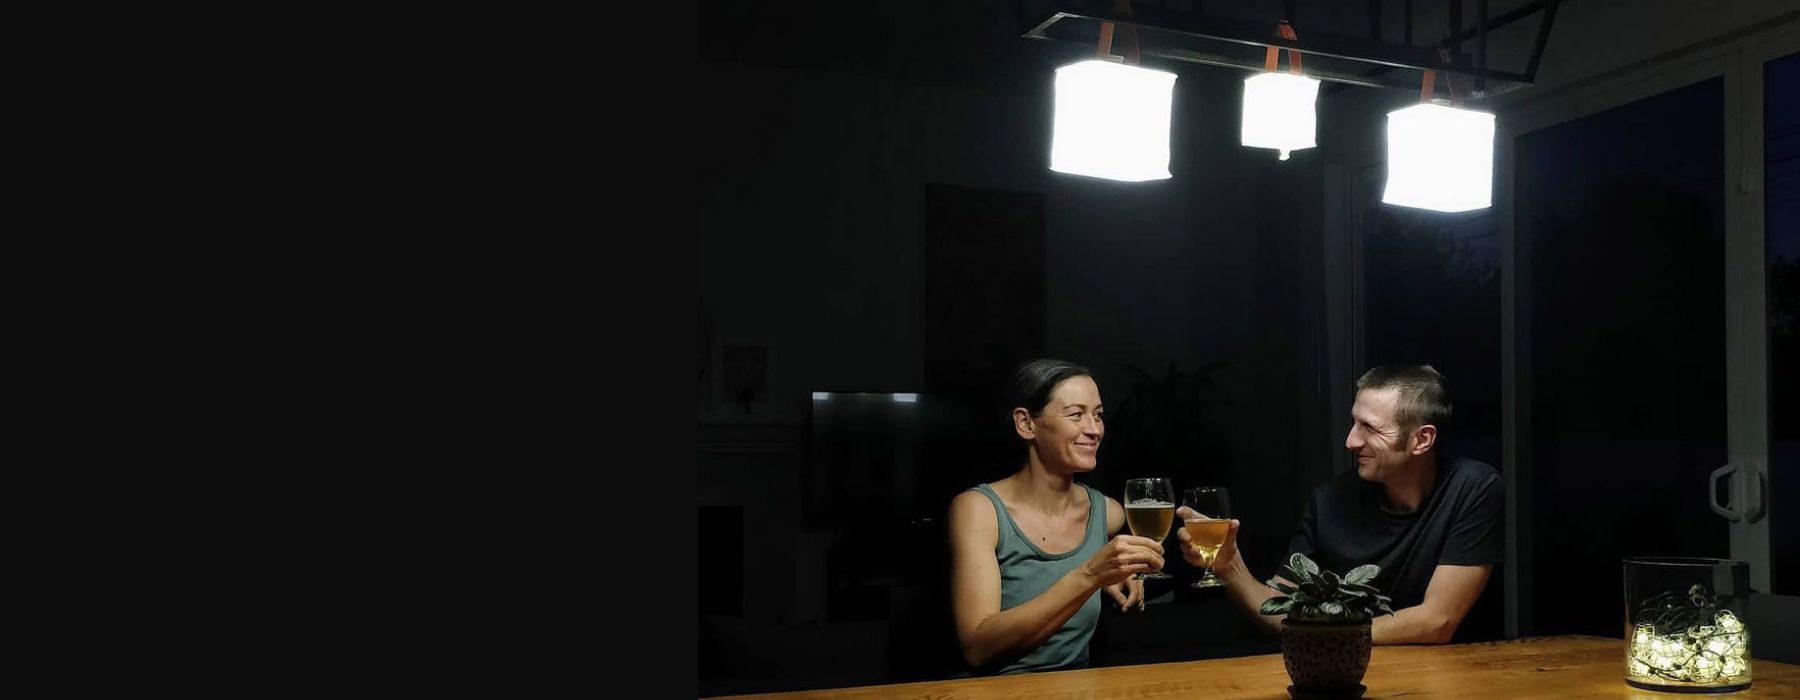 Man and woman drinking during a power outage